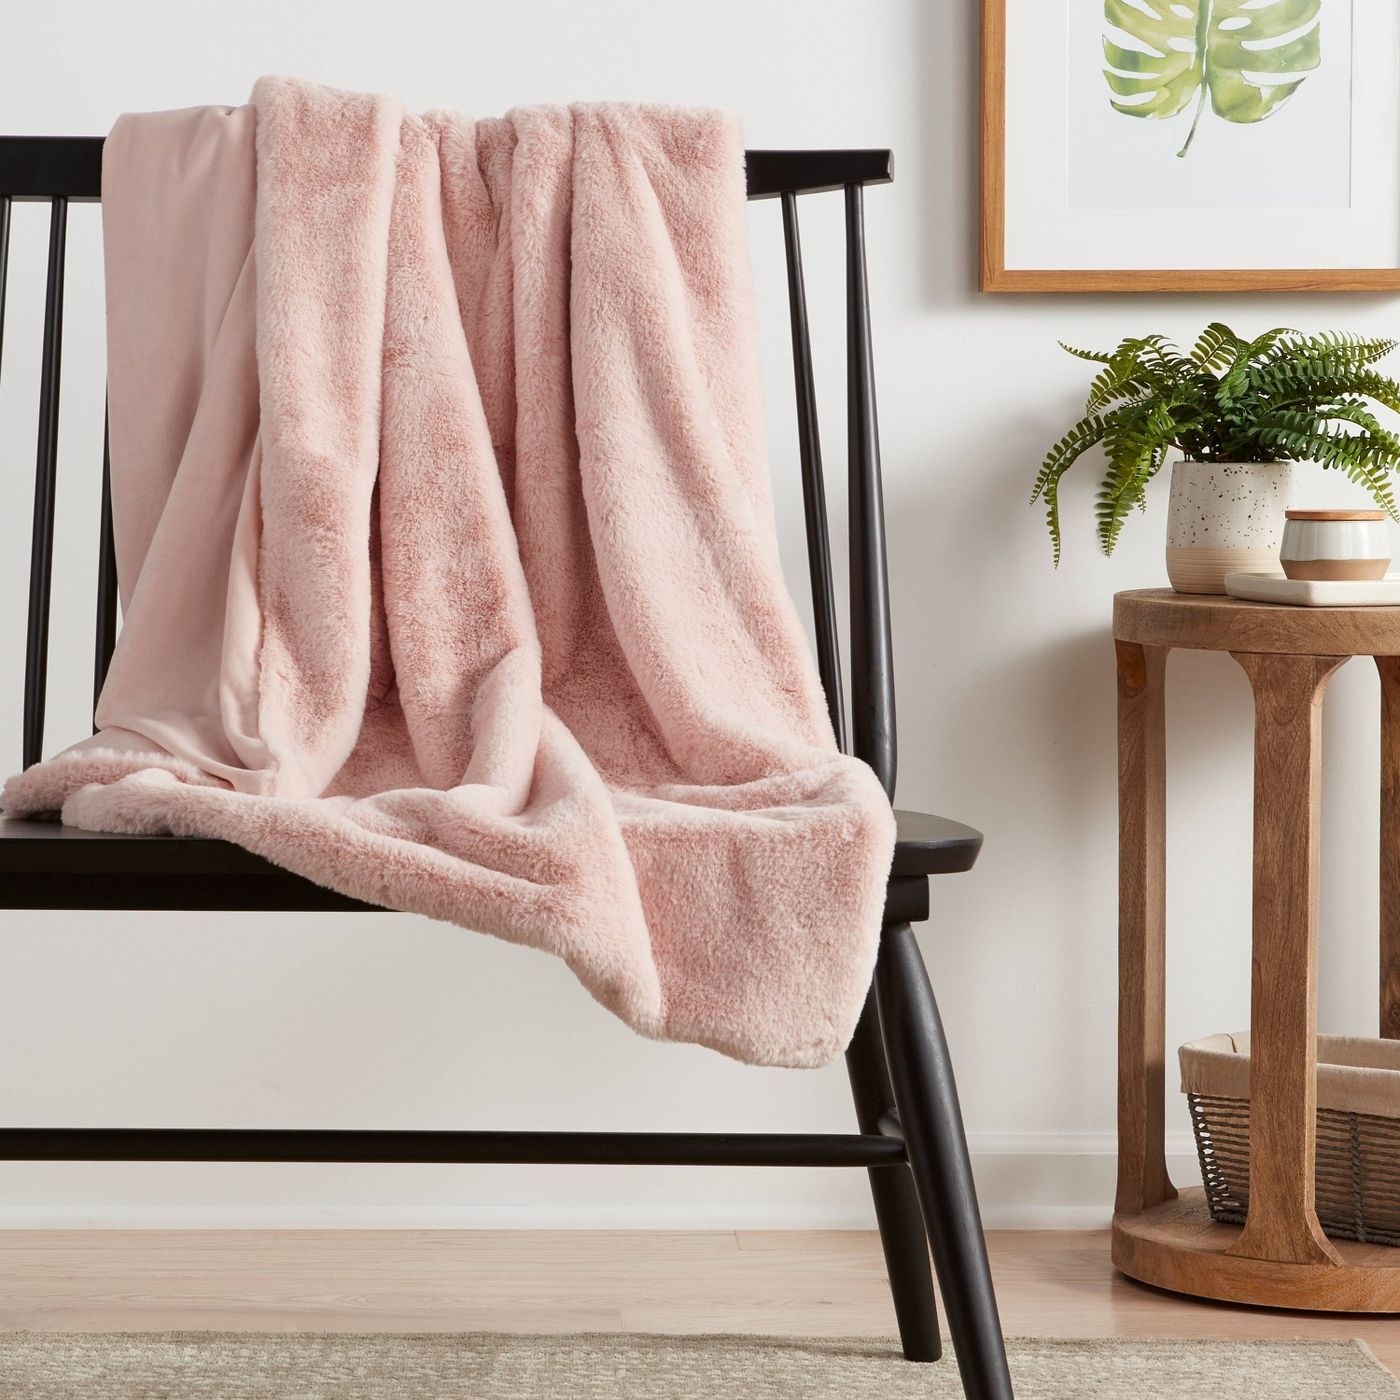 A pink fuzzy blanket draped over a black wooden chair